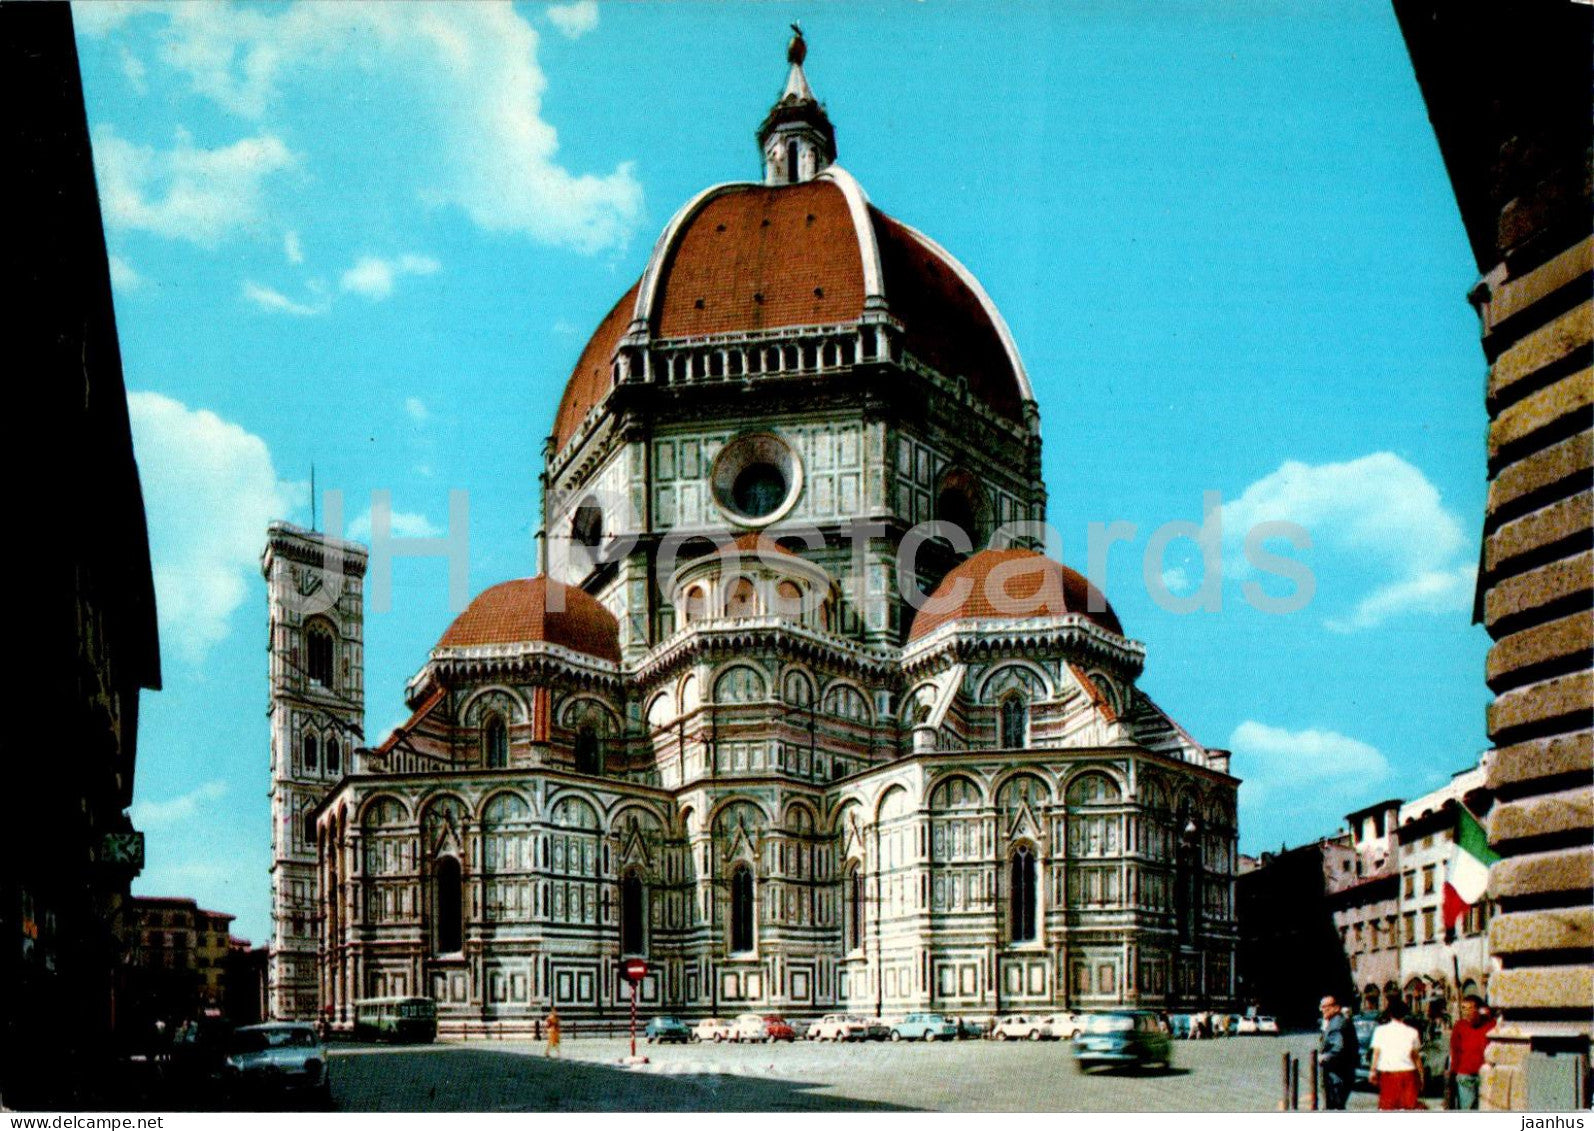 Firenze - Il Duomo - Abside - The Cathedral - Apsis - FIR 37 - 1986 - Italy - used - JH Postcards